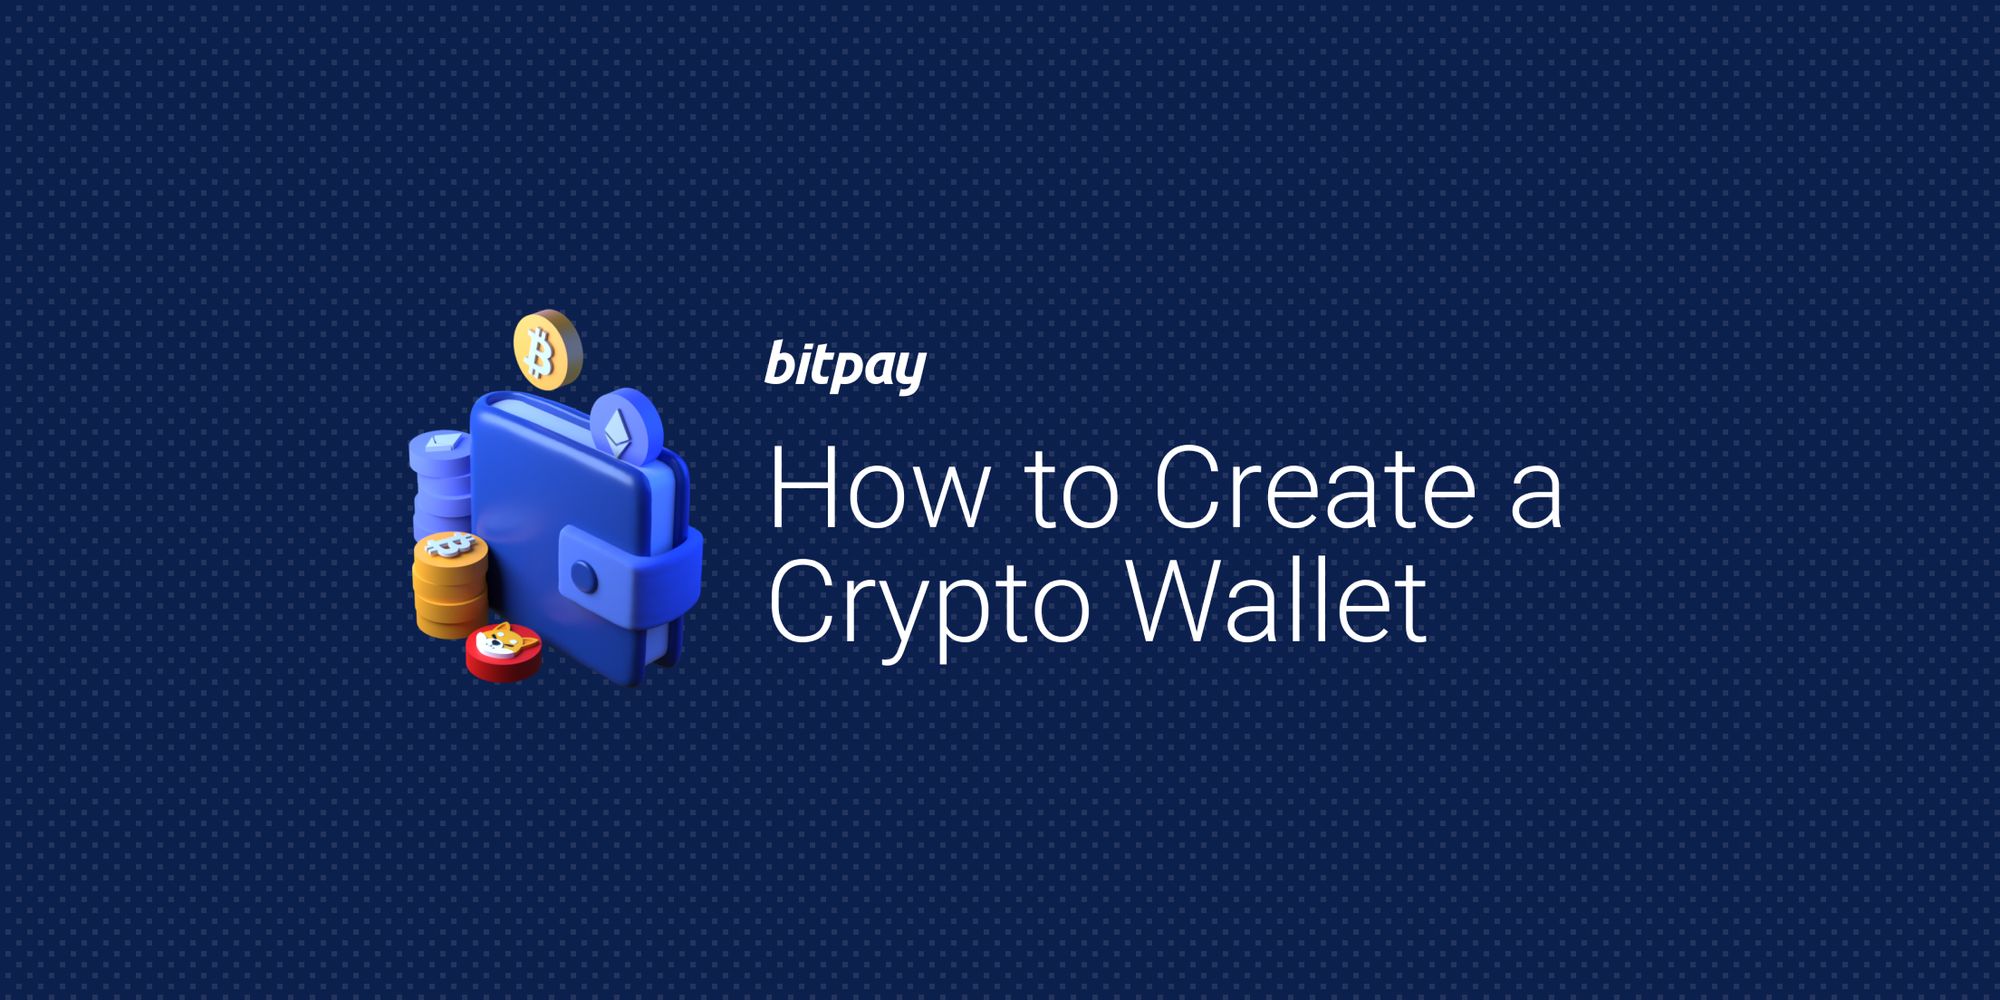 How to update Bitcoin wallet? Guide to upgrade cryptocurrency wallets